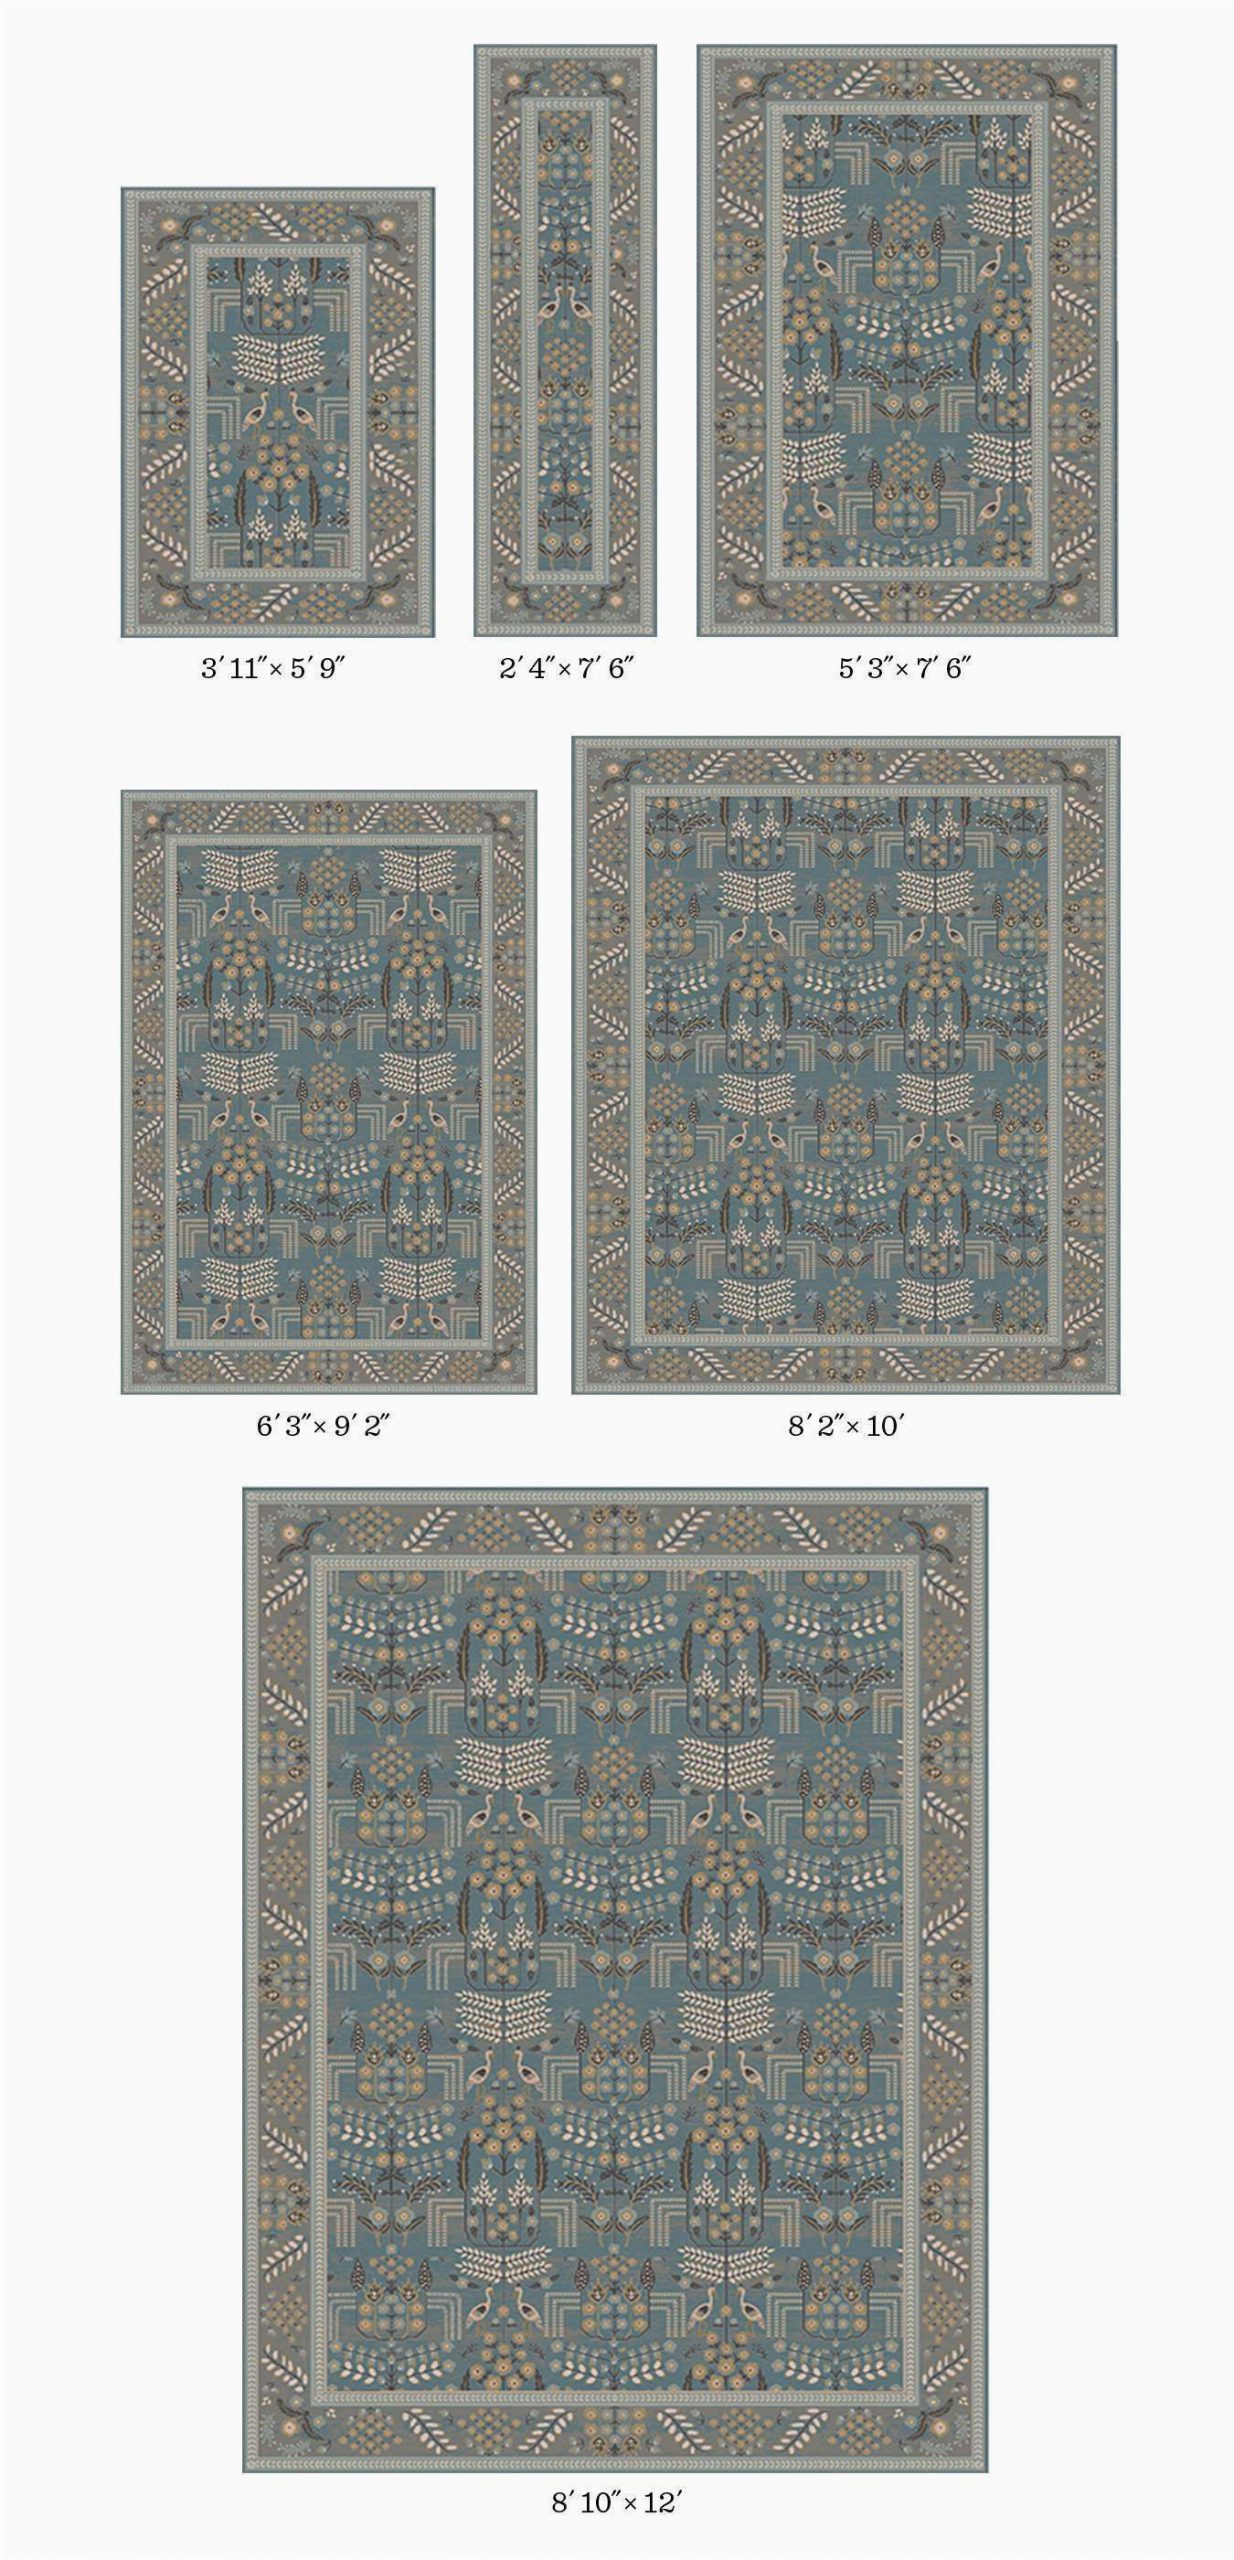 3 X 6 Bathroom Rug Rug Size Parison for Mobile View